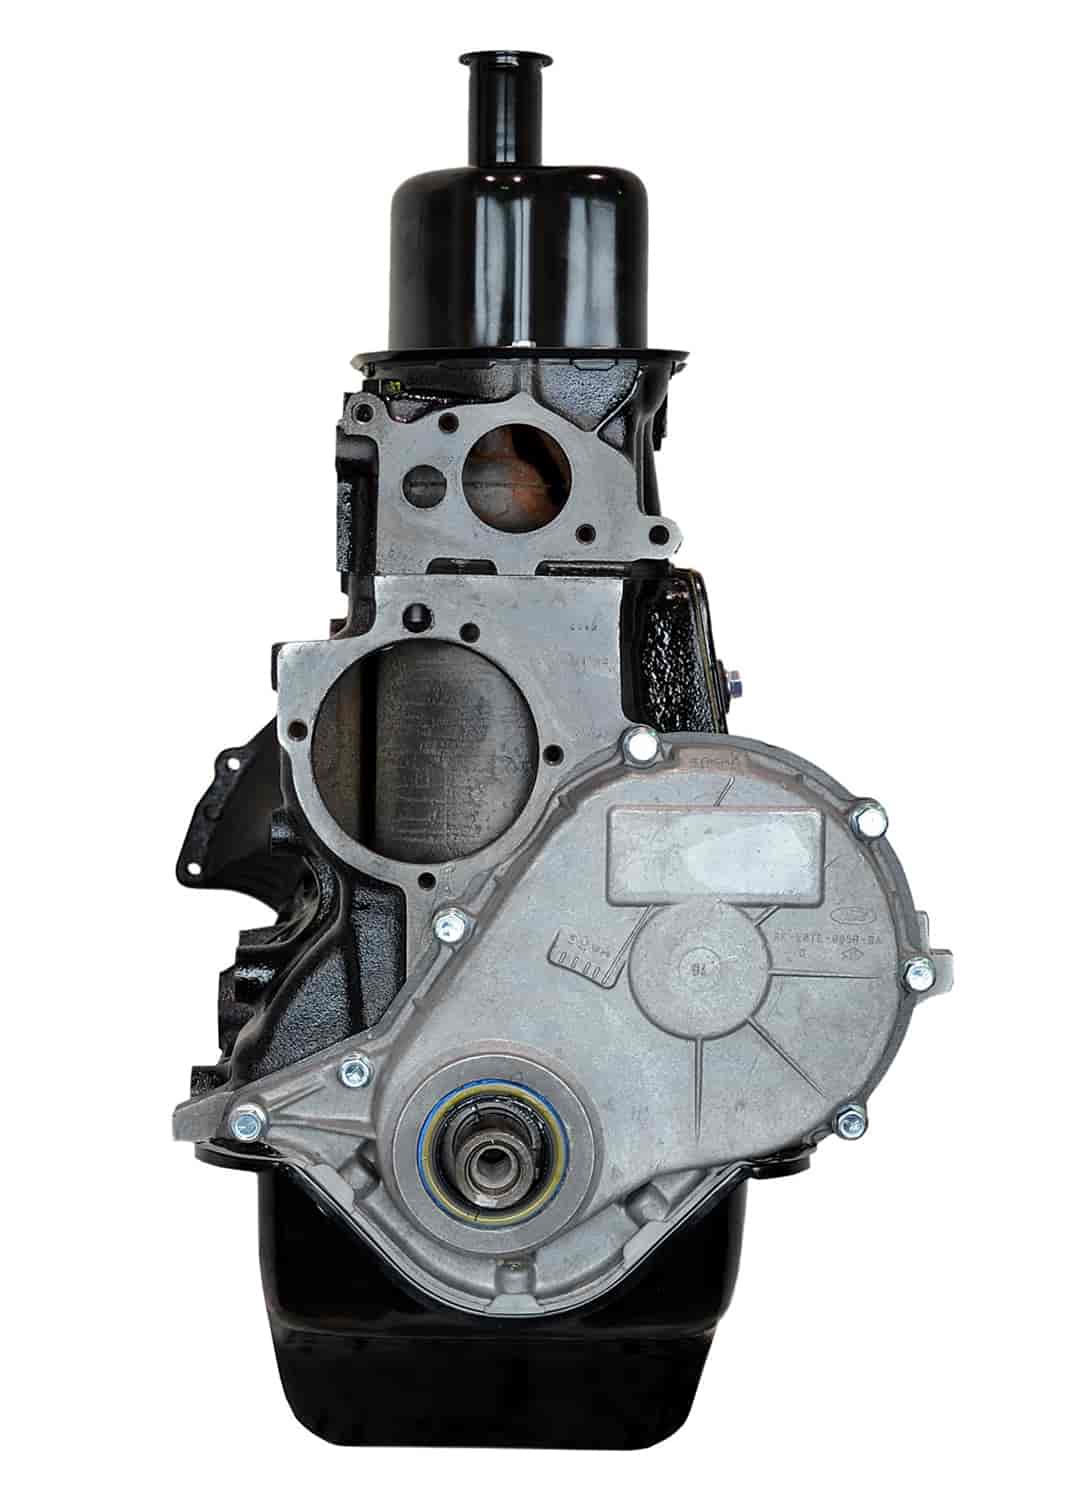 Remanufactured Crate Engine for 1982-1985 Ford F-Series Truck & E-Series Van with 300ci/4.9L L6